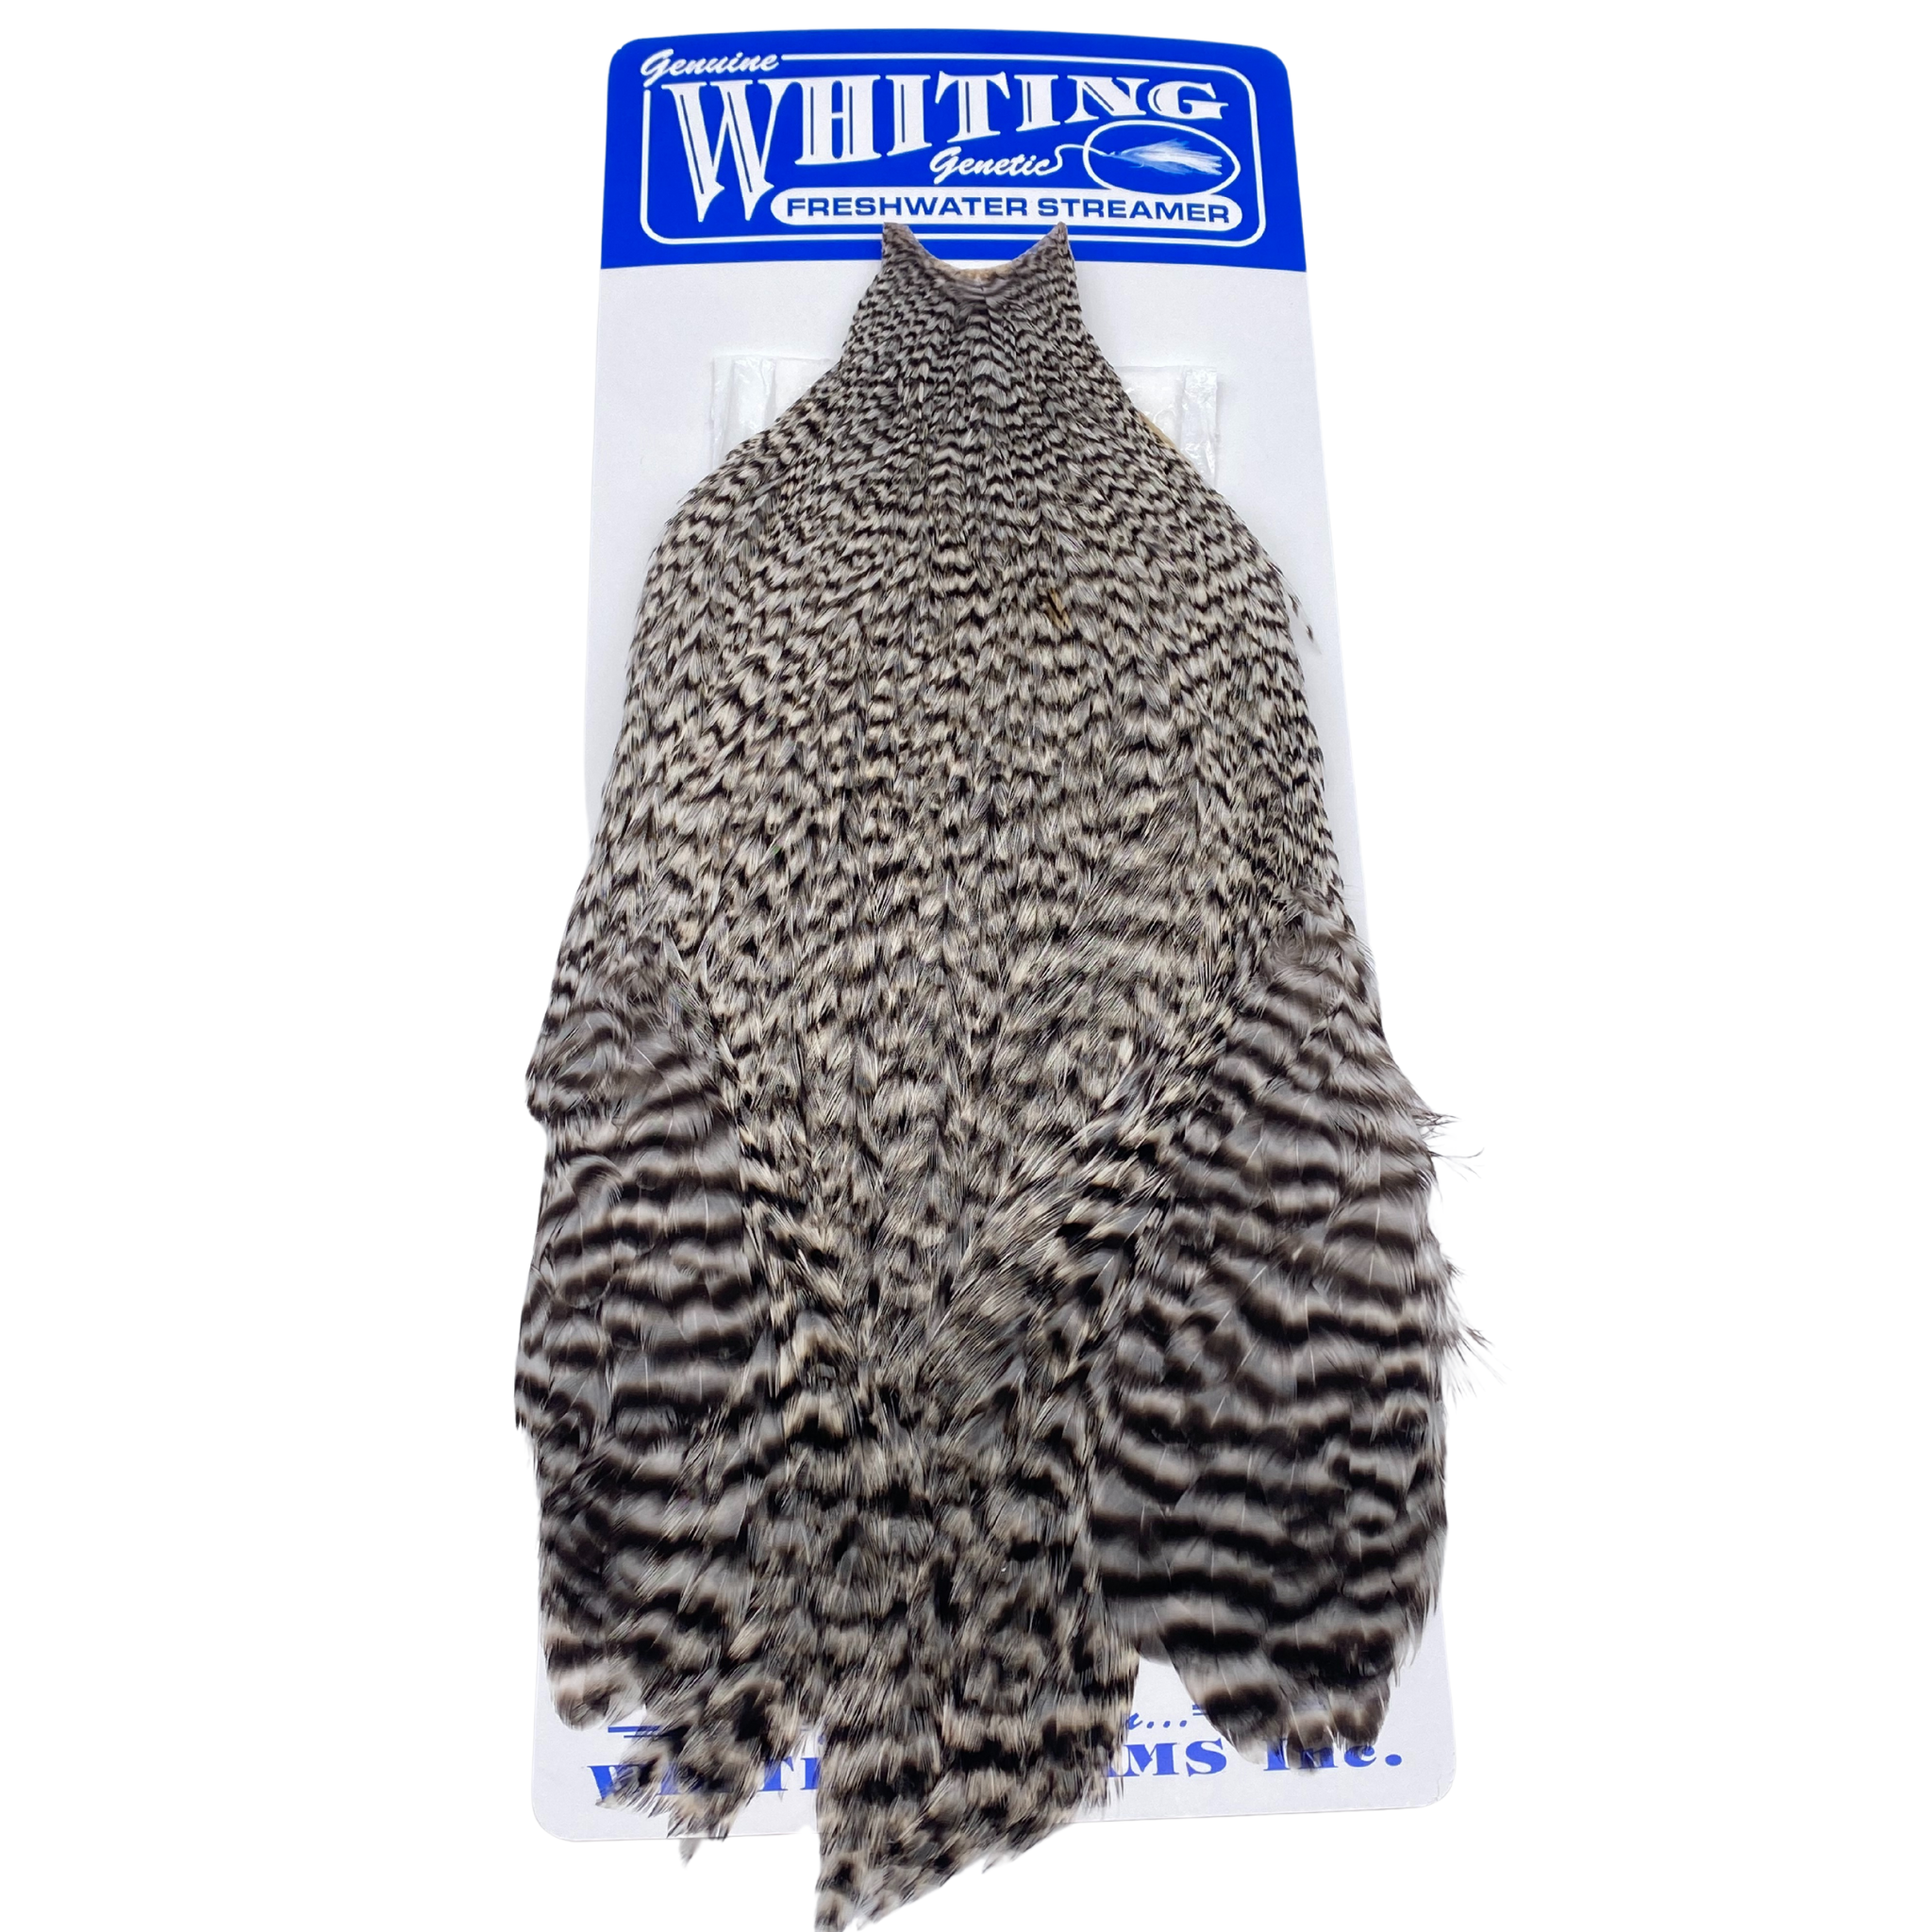 Whiting Freshwater Streamer Rooster Cape